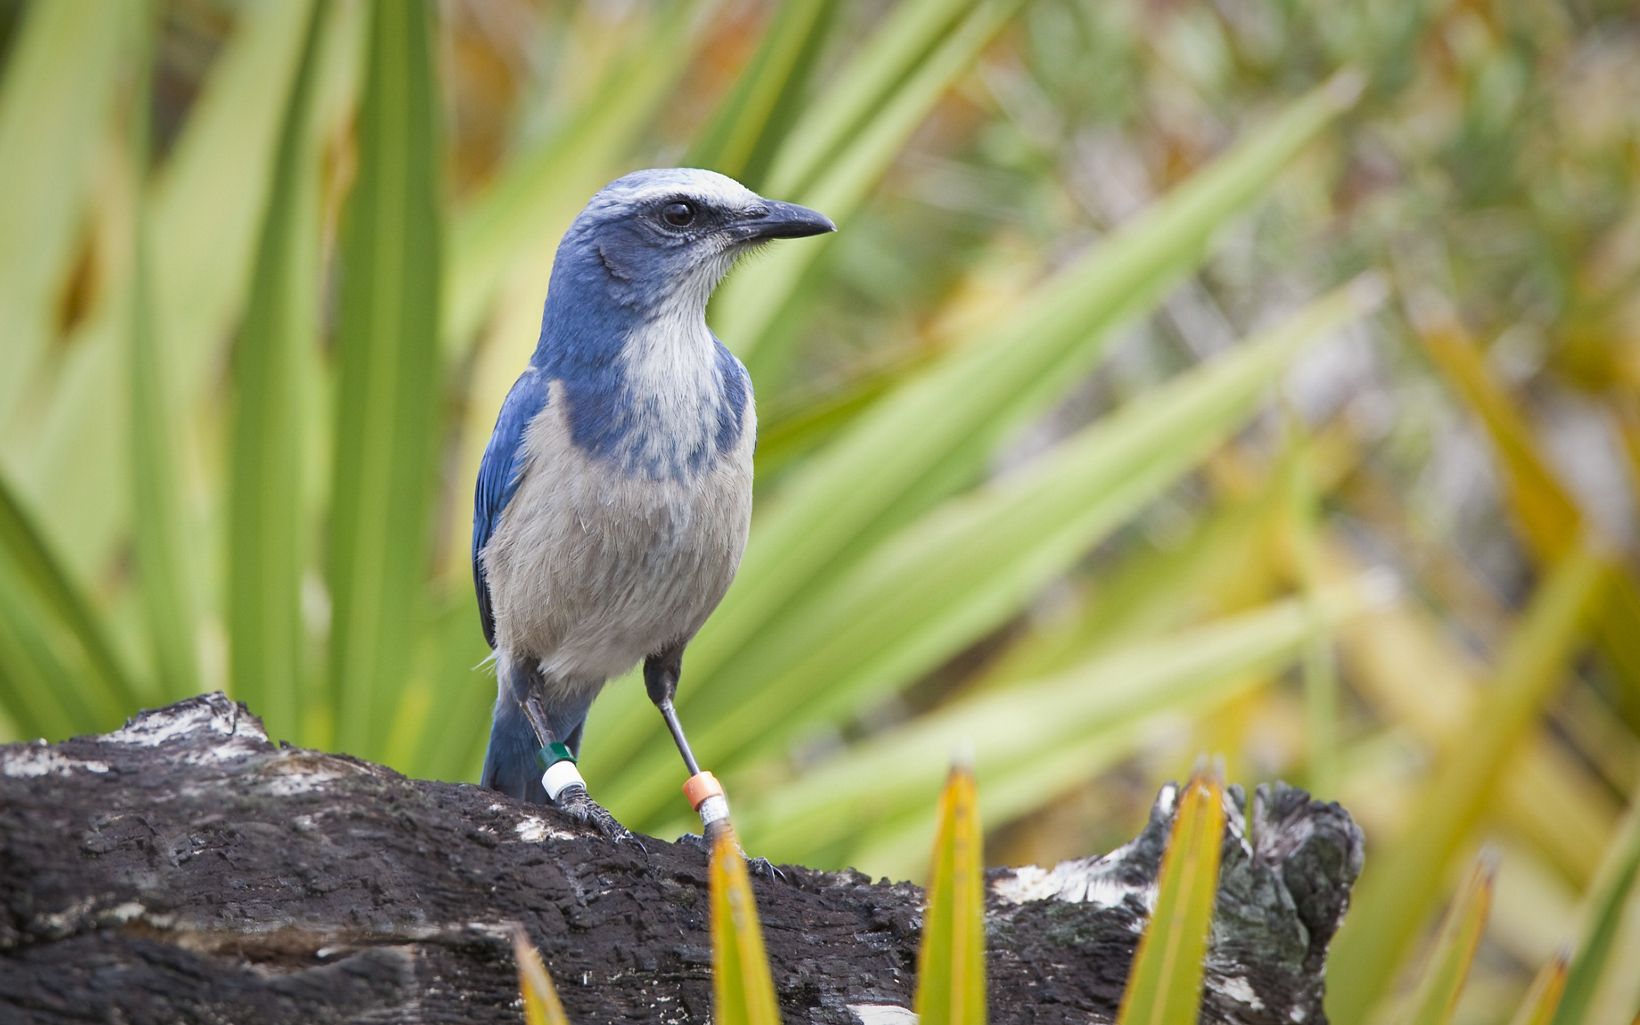 Florida Scrub Jay Florida scrub jays are endemic to Florida, meaning they're found nowhere else on Earth. They thrive in longleaf pine habitat. © David Moynahan